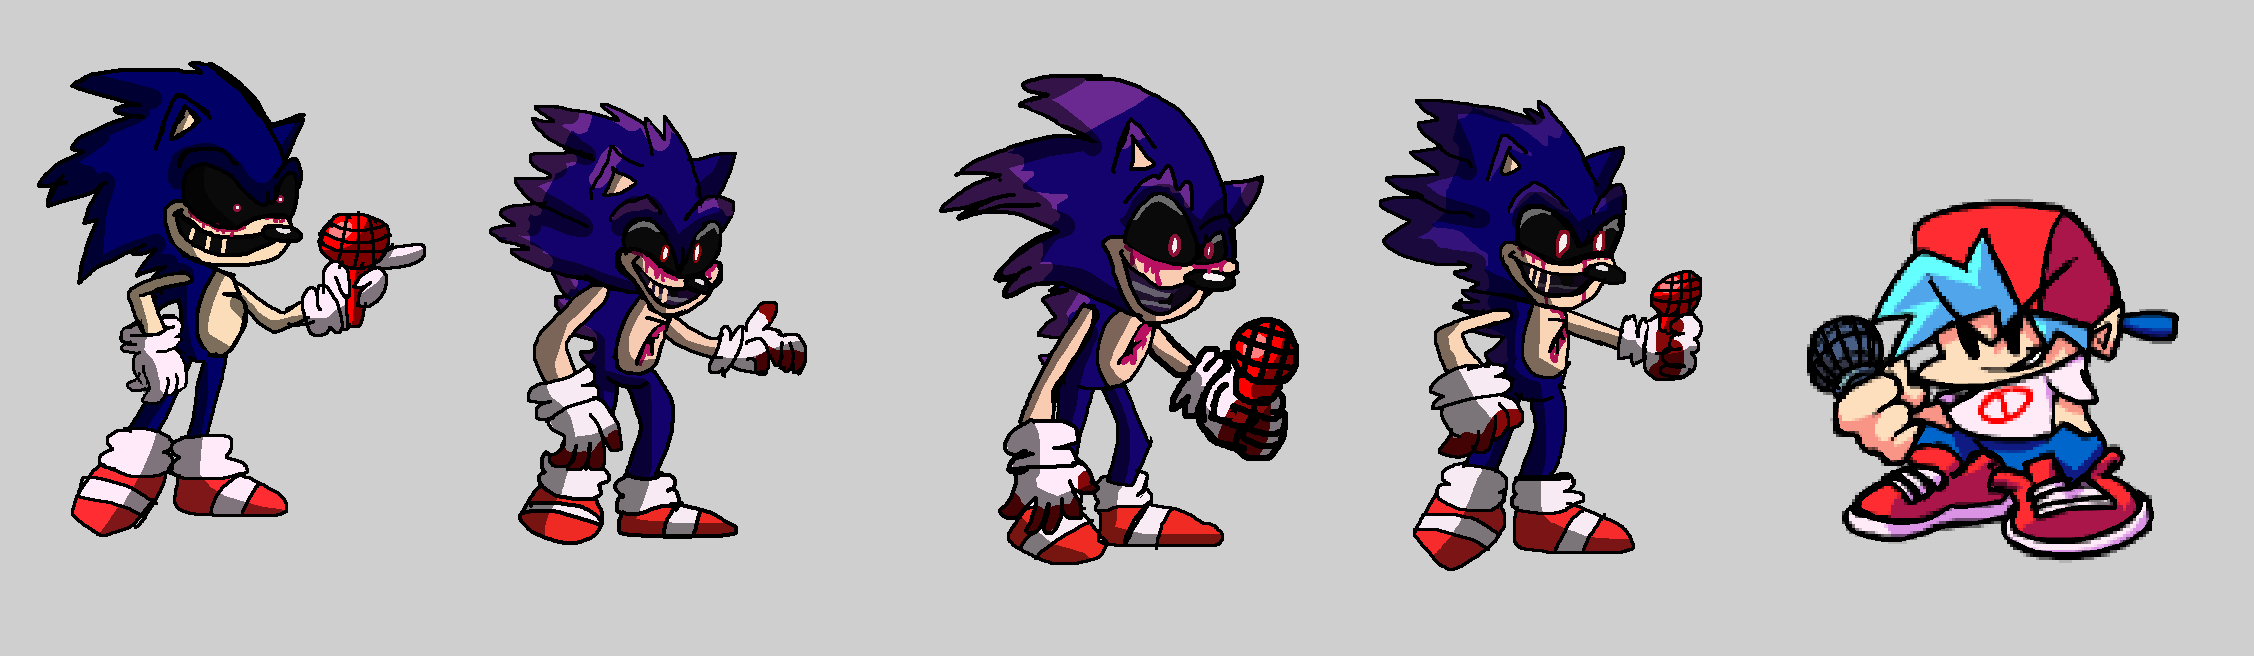 Shadings of Sonic.exe's Fusion Phases - Vs. Sonic. by Abbysek on DeviantArt